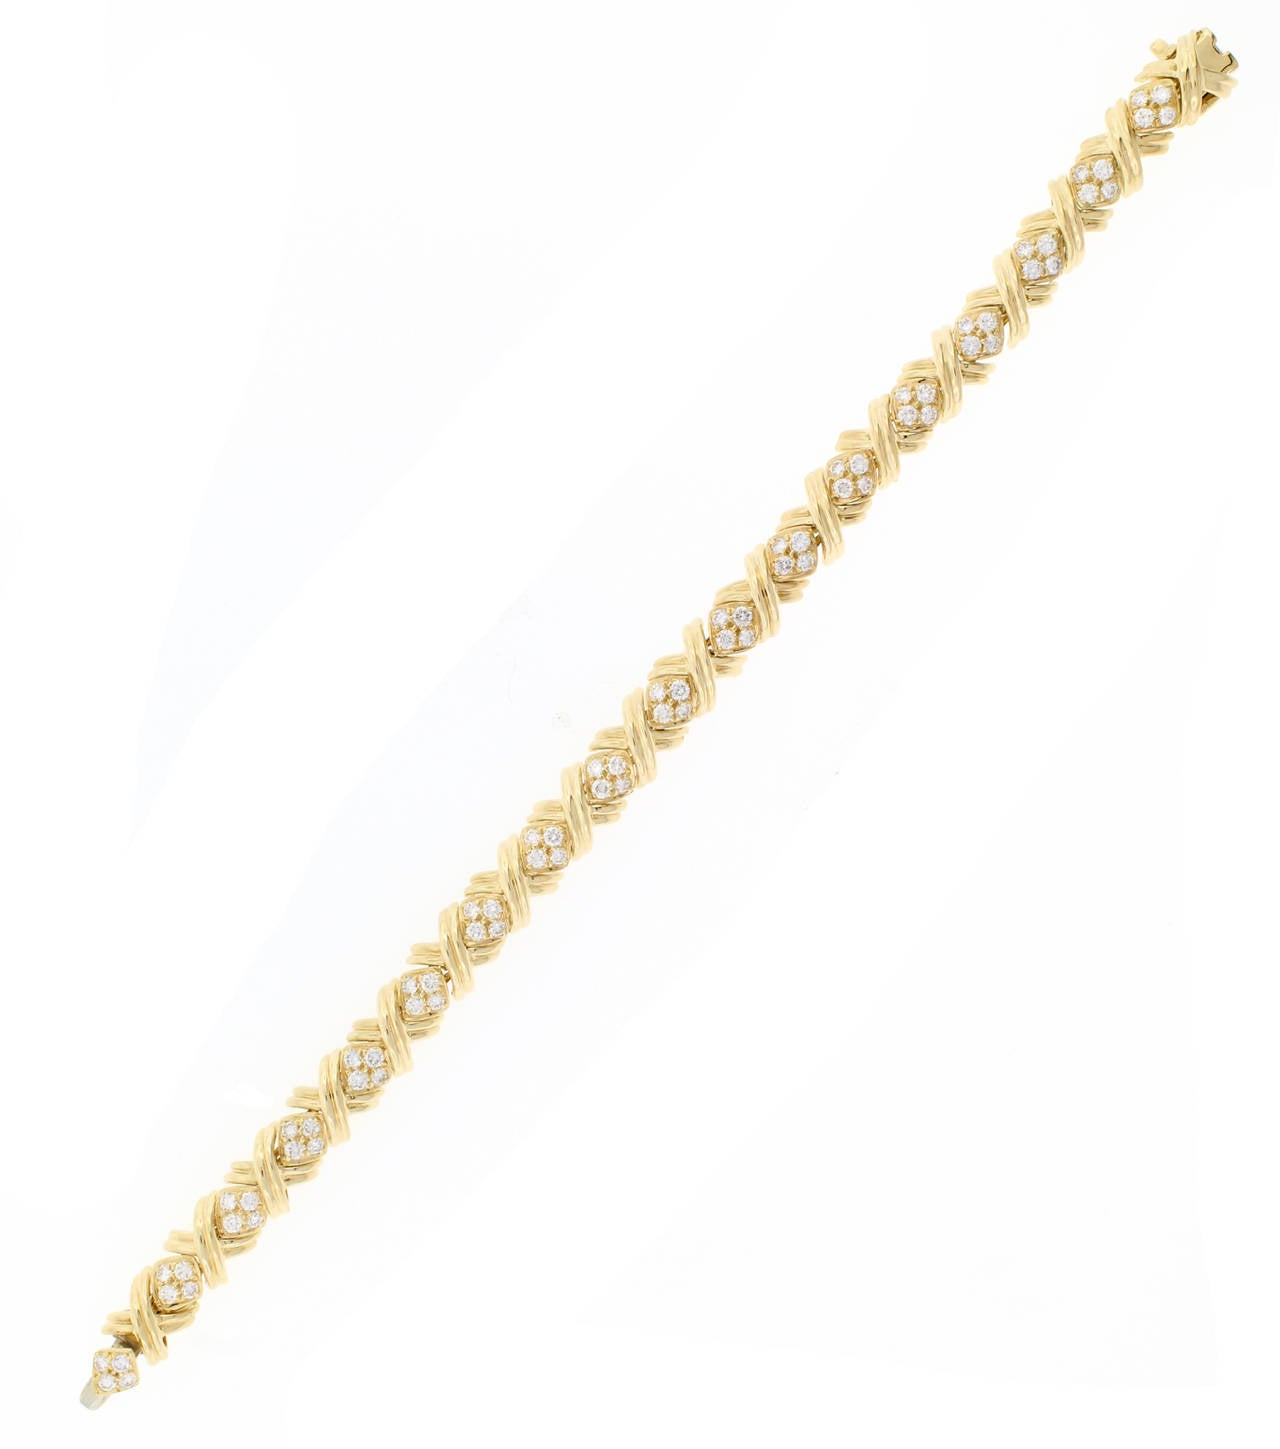 18 Karat yellow gold diamond signature X bracelet with 75 diamonds weighing 2.25 carat. The diamonds are G color and VVS clarity. 7 1/4 inches. Signed Tiffany & Co.